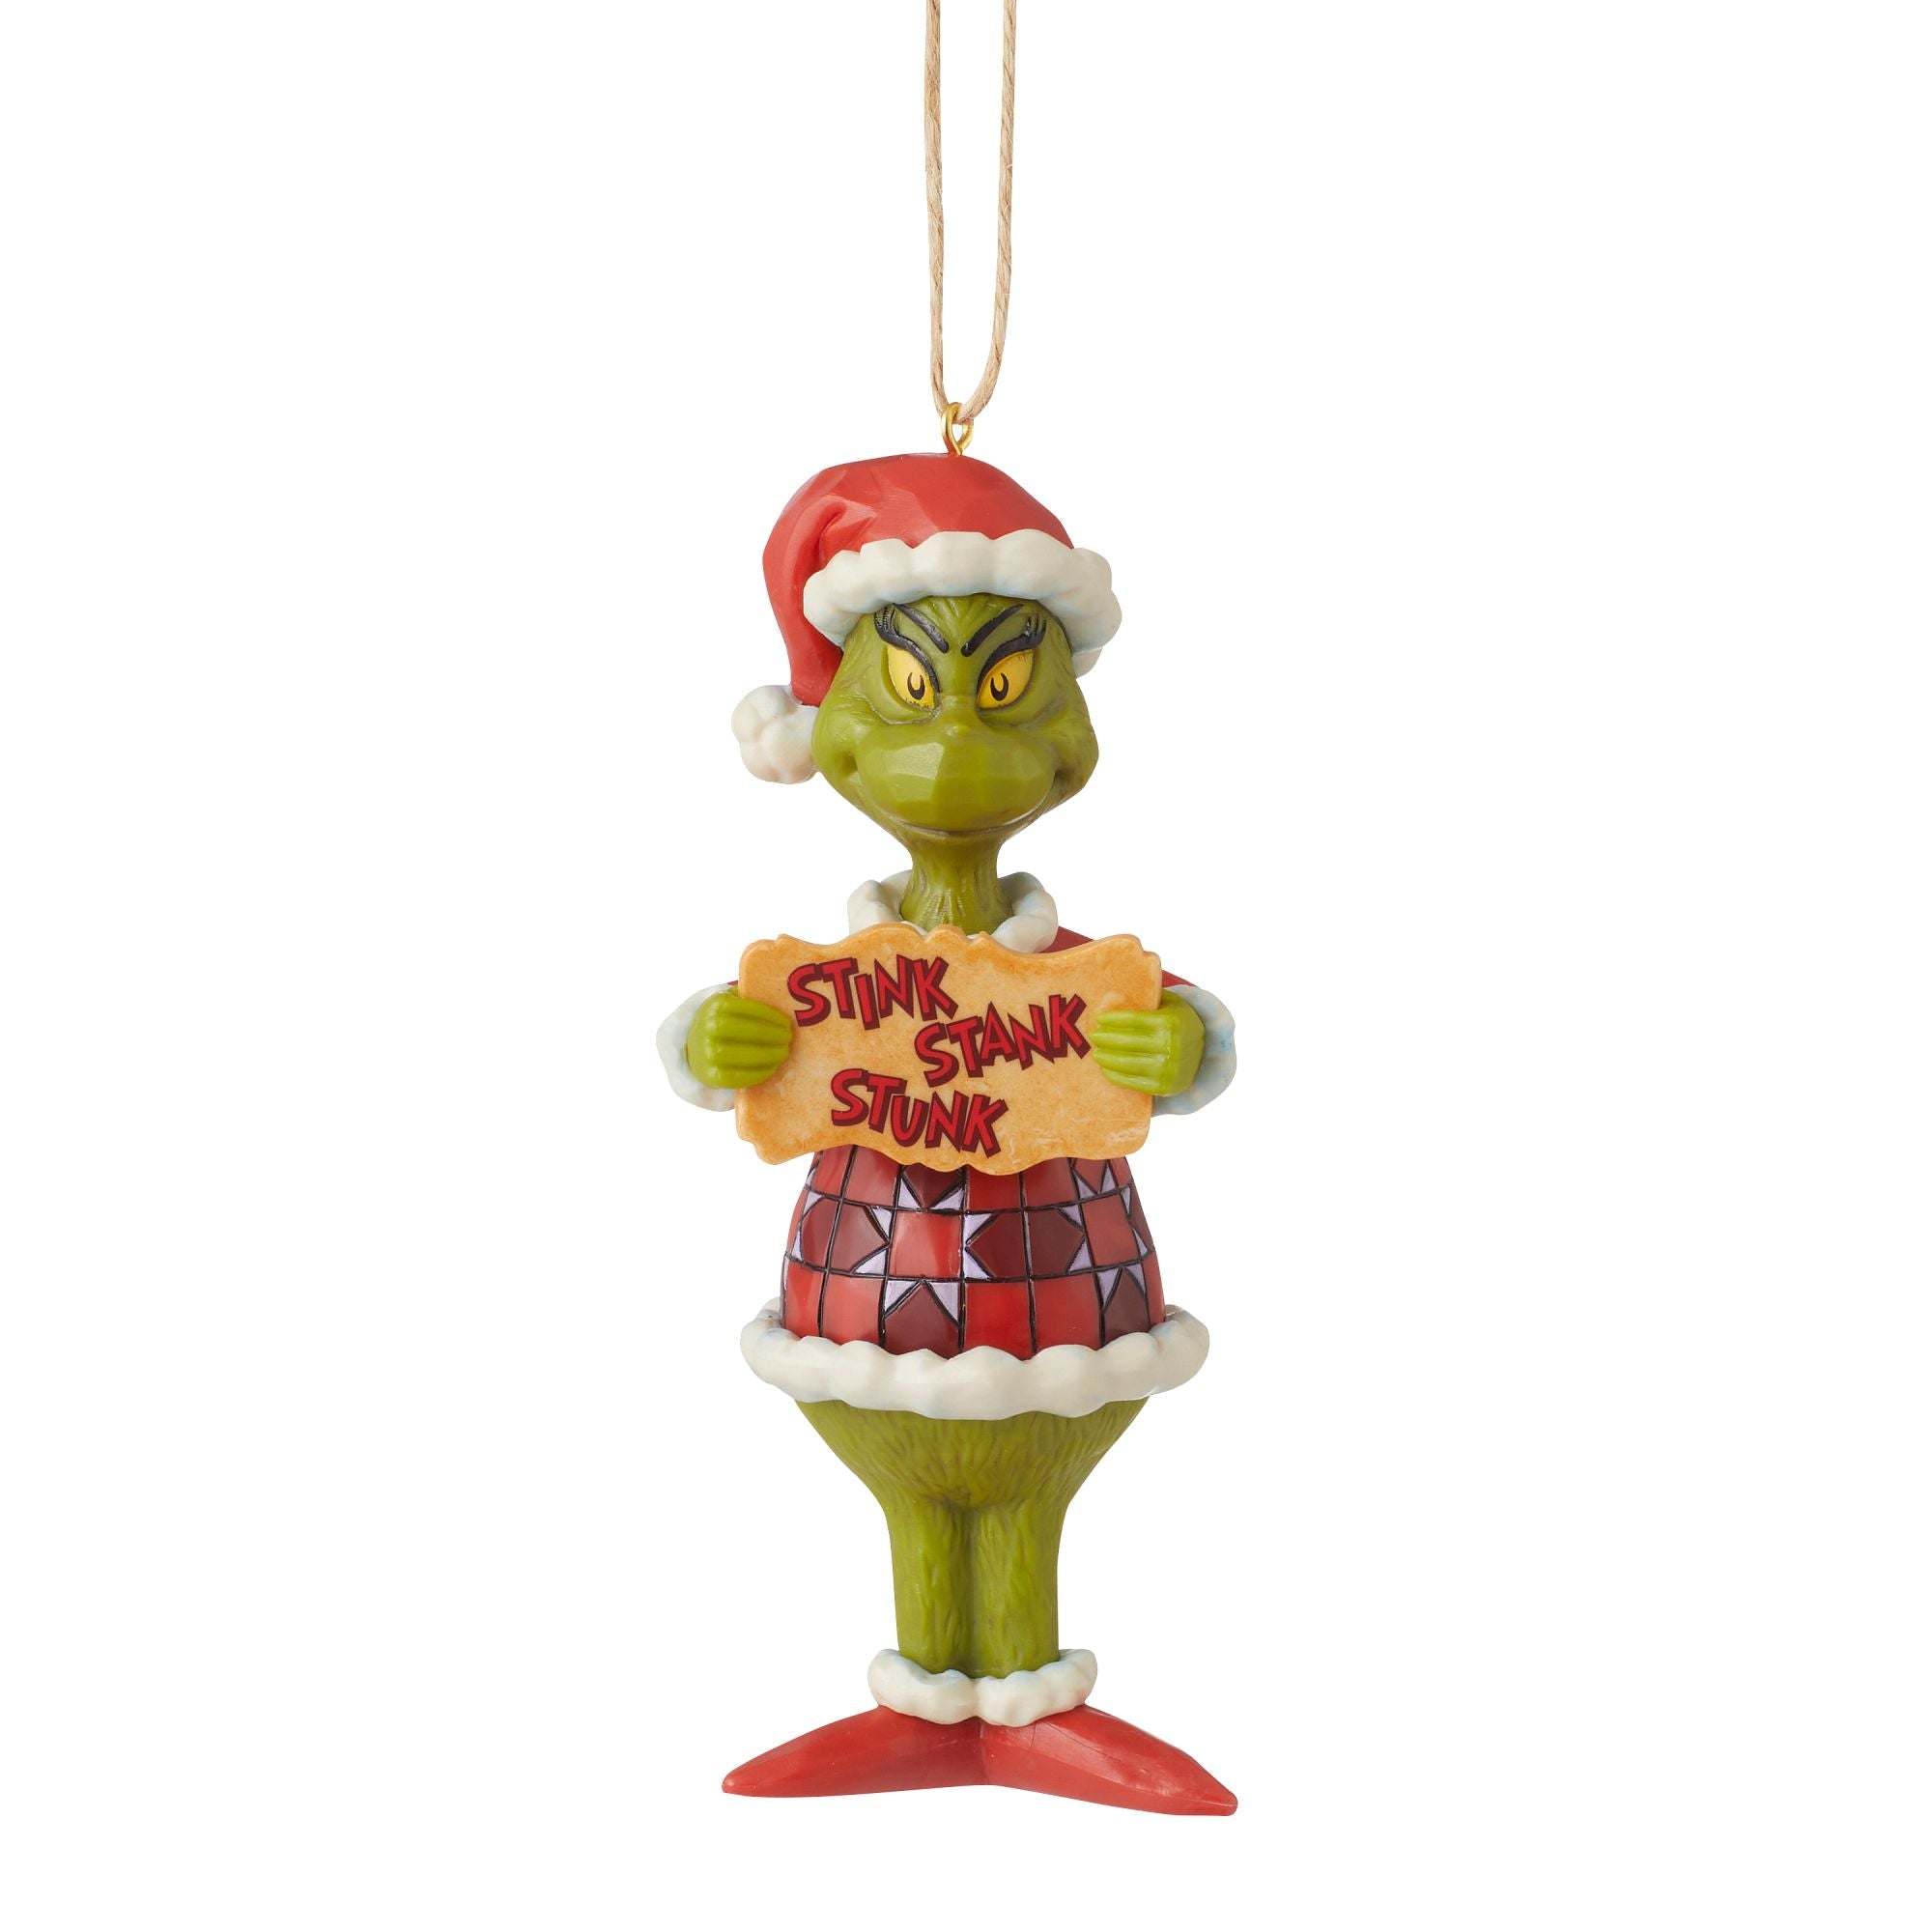 Grinch in Red Truck Ornament – Jim Shore